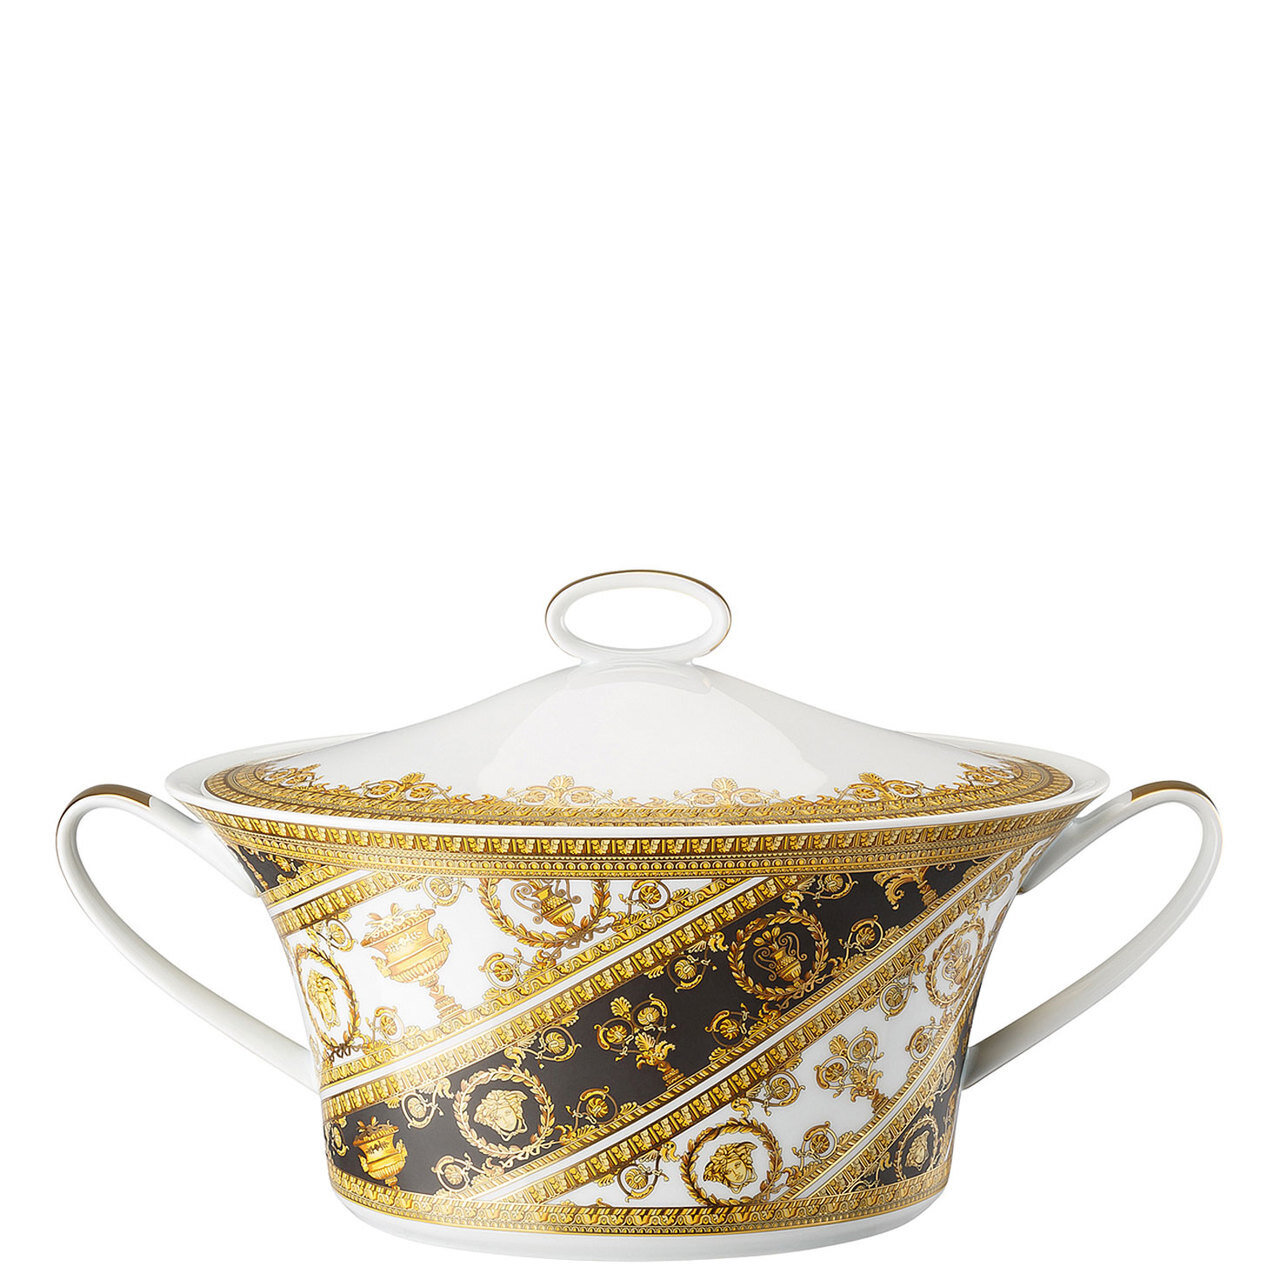 Versace I Love Baroque Vegetable Bowl Covered